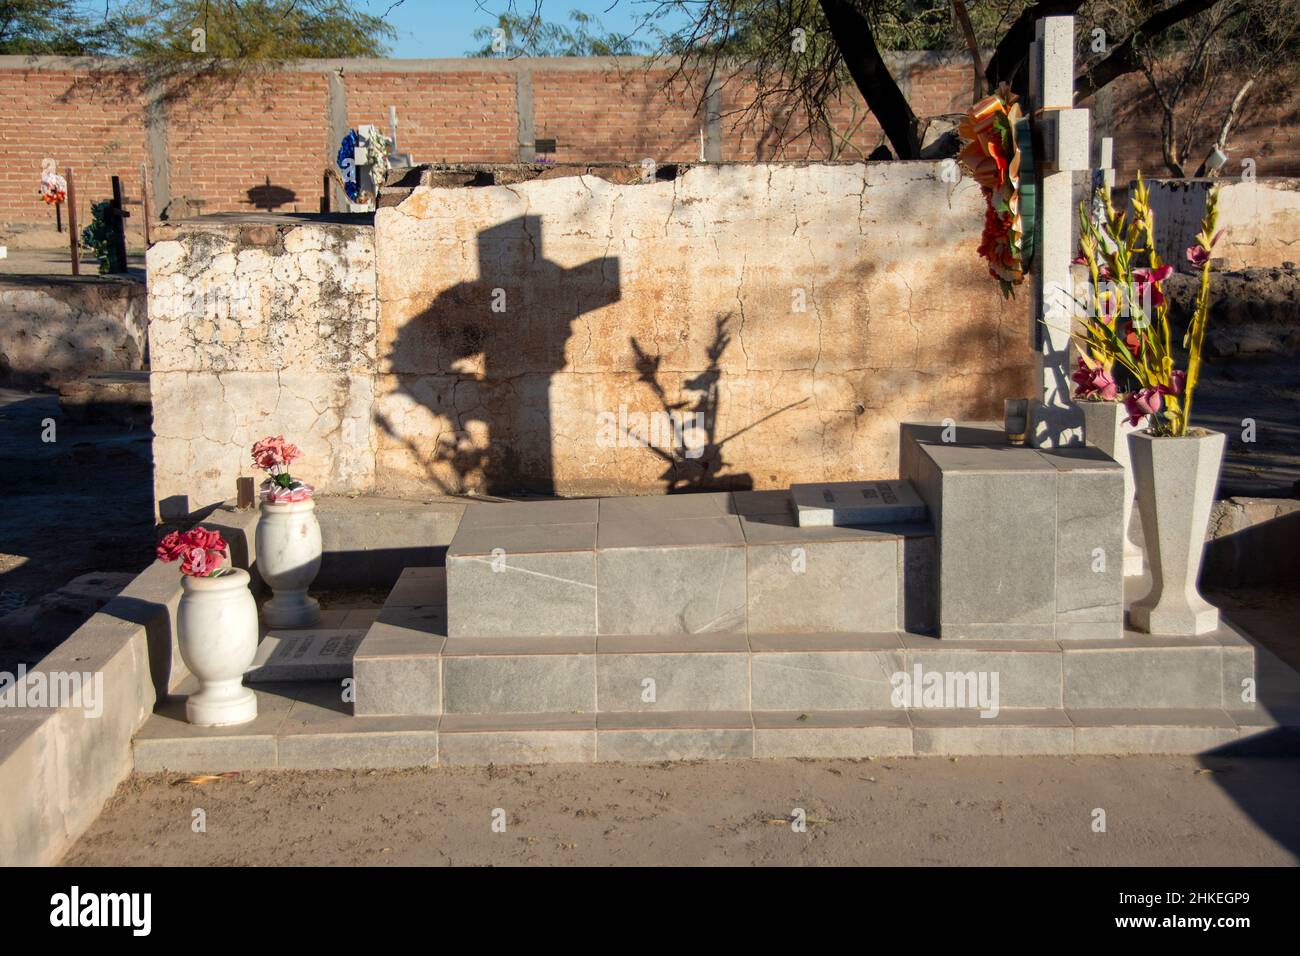 The shadow of a cross on another gravesite, Sonoyta, Sonora, Mexico. Stock Photo